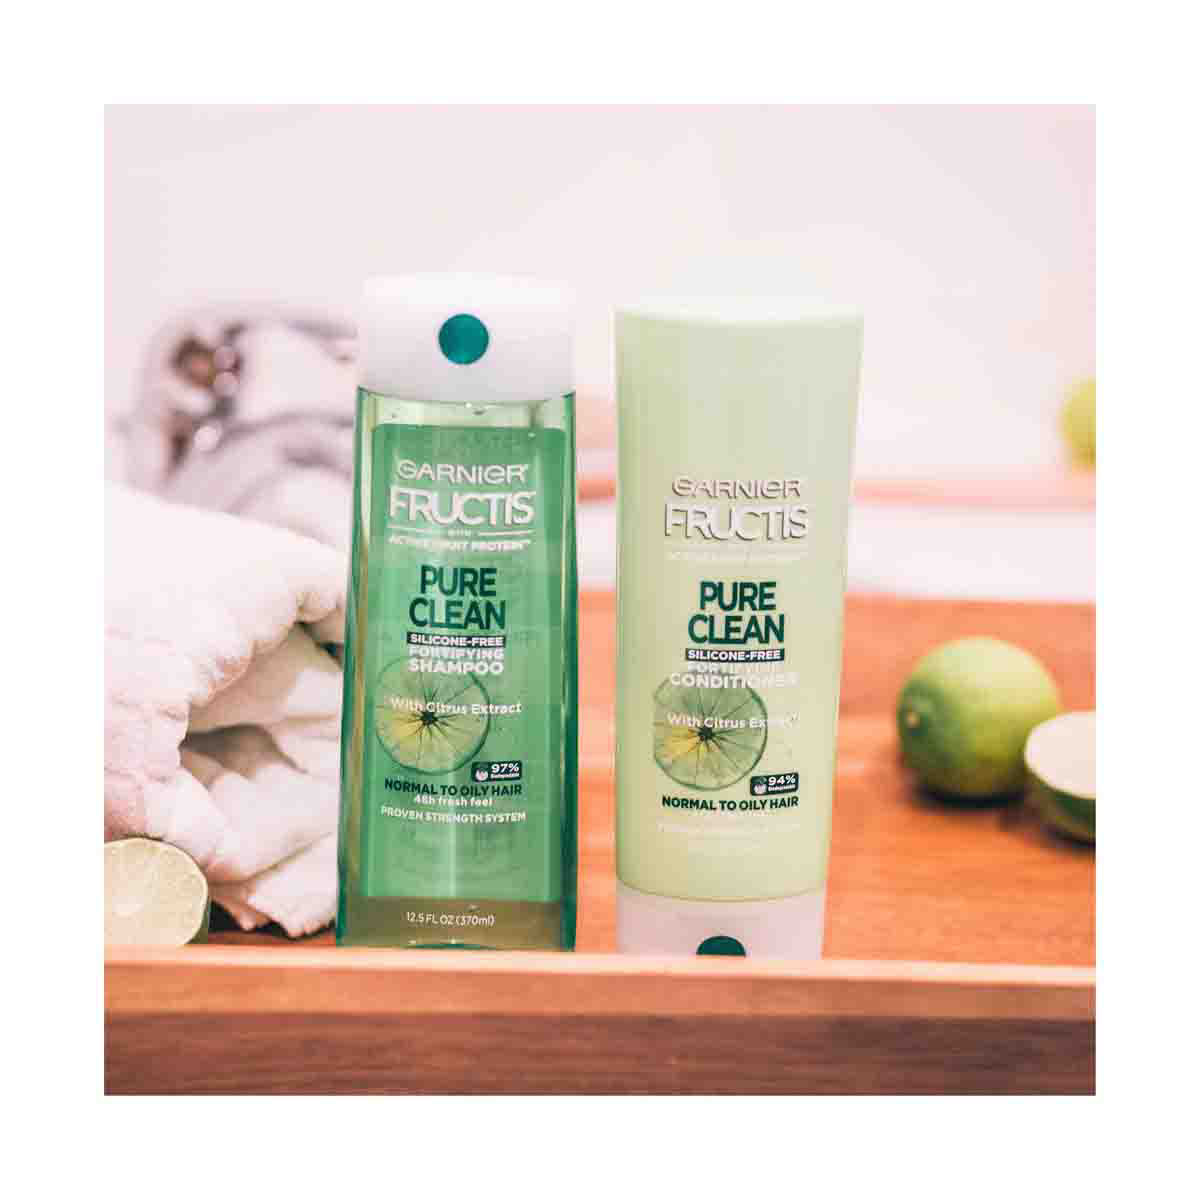 Extract, Shampoo, E Clean Vitamin Aloe and Fortifying With 12.5 fl. Pure Fructis Garnier